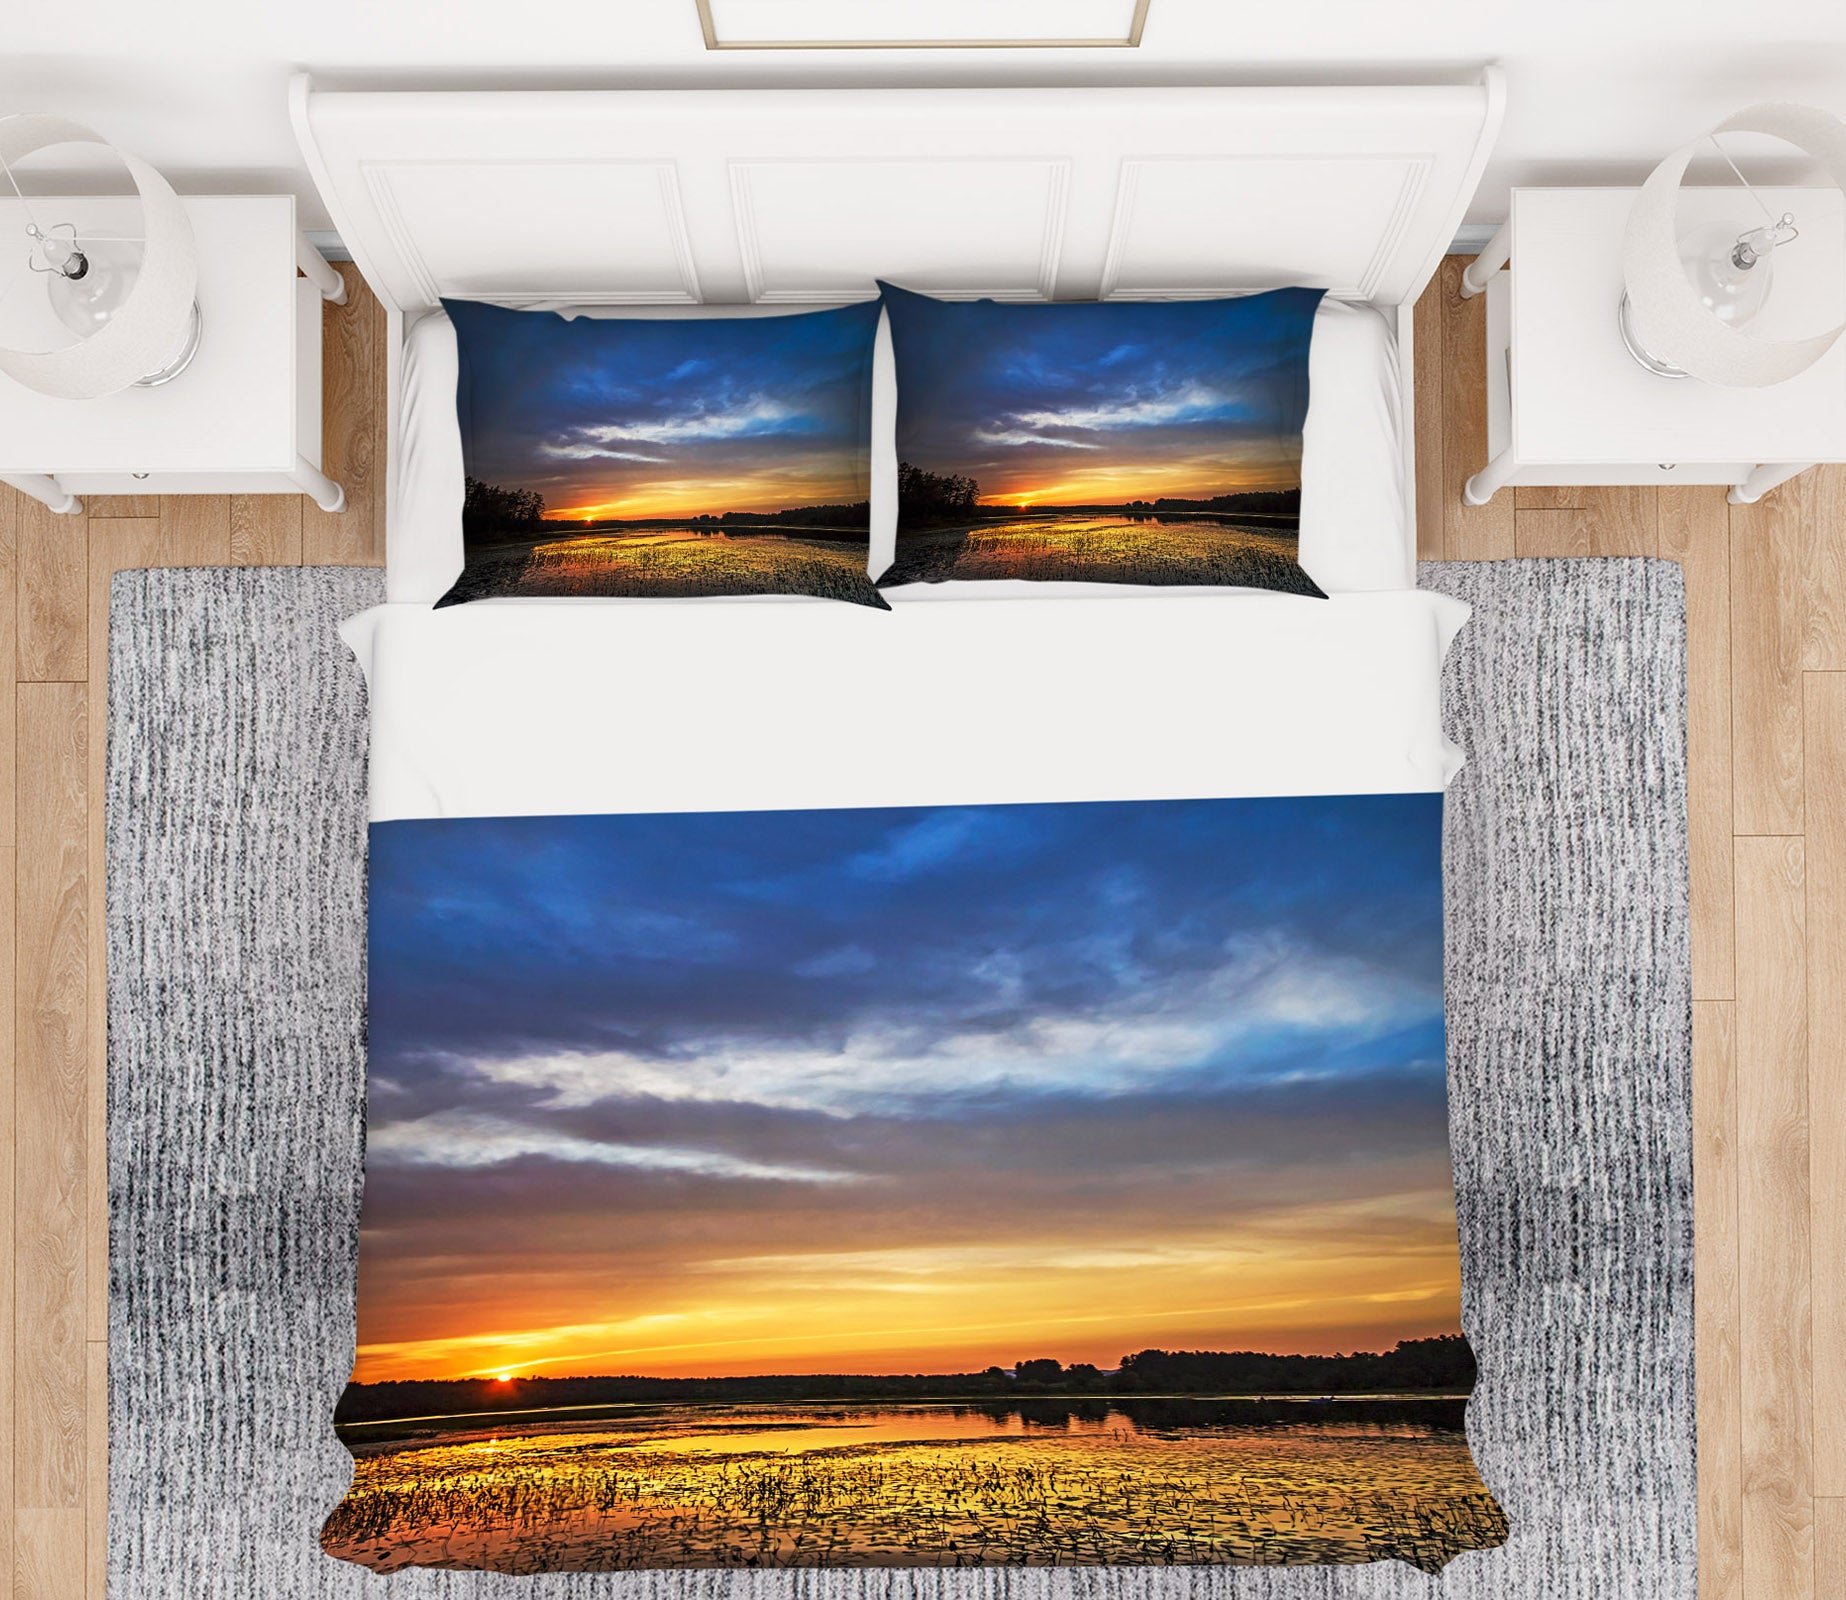 3D Peaceful Sunset 86036 Jerry LoFaro bedding Bed Pillowcases Quilt